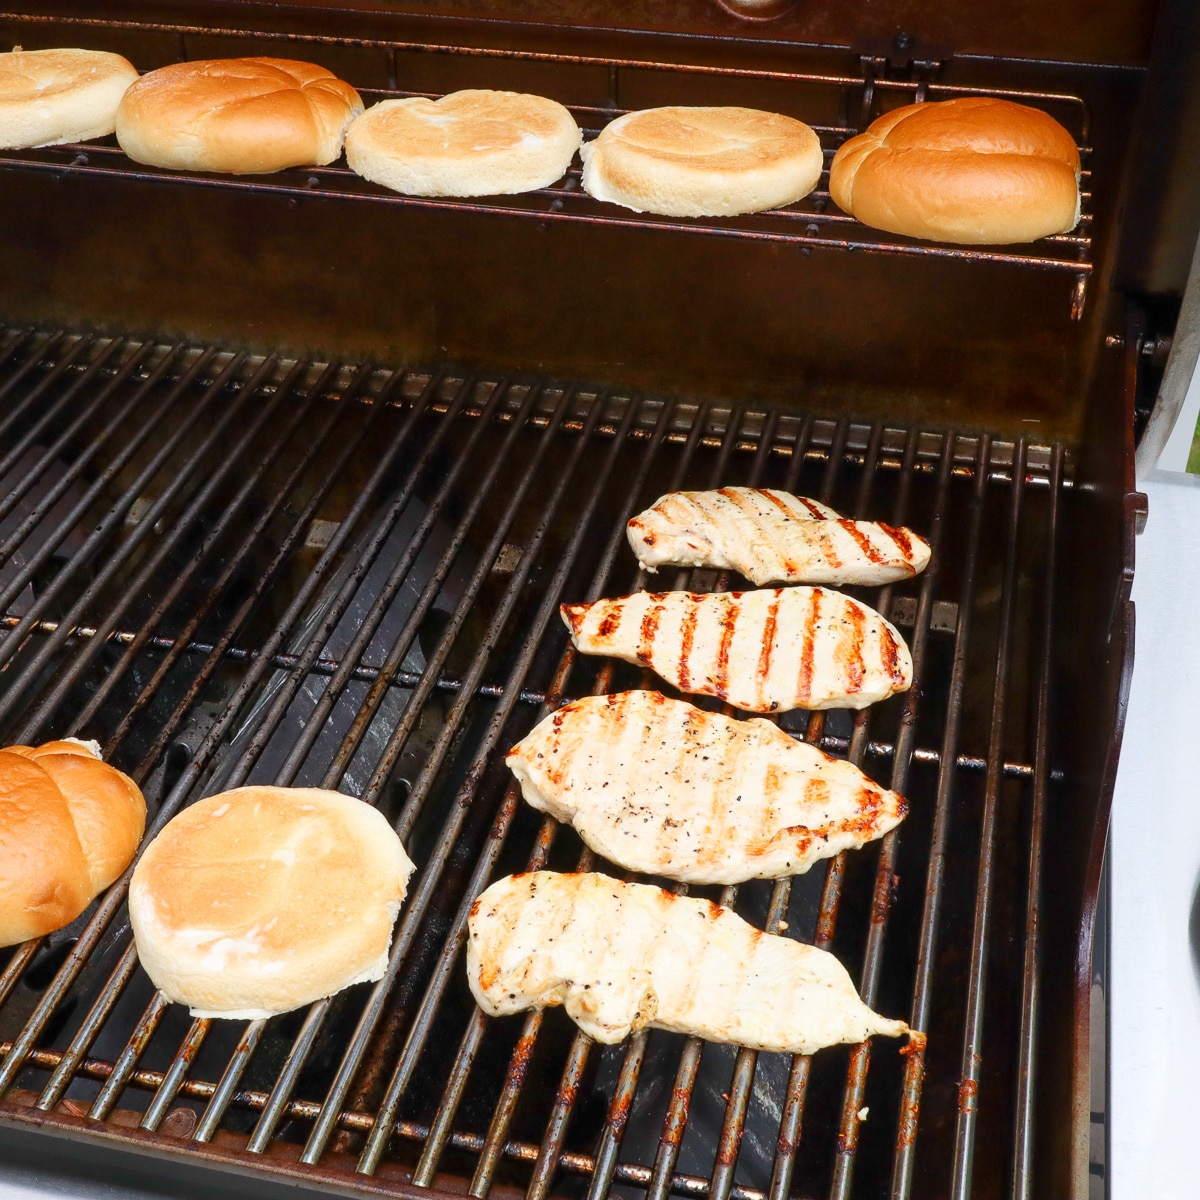 buns and chicken being grilled